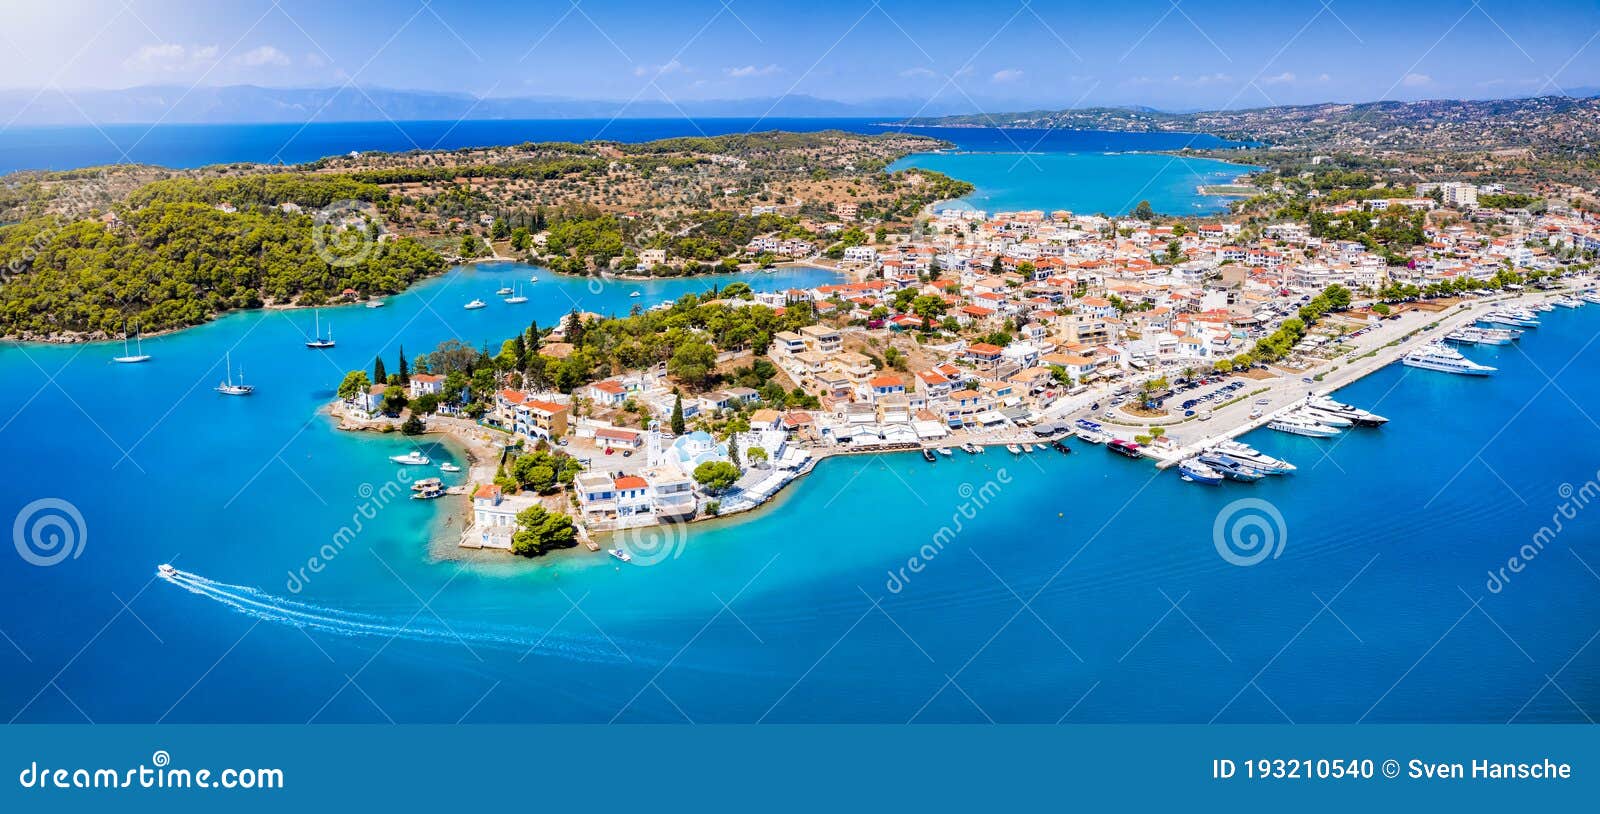 panoramic, aerial view to the port and city of porto cheli, greece